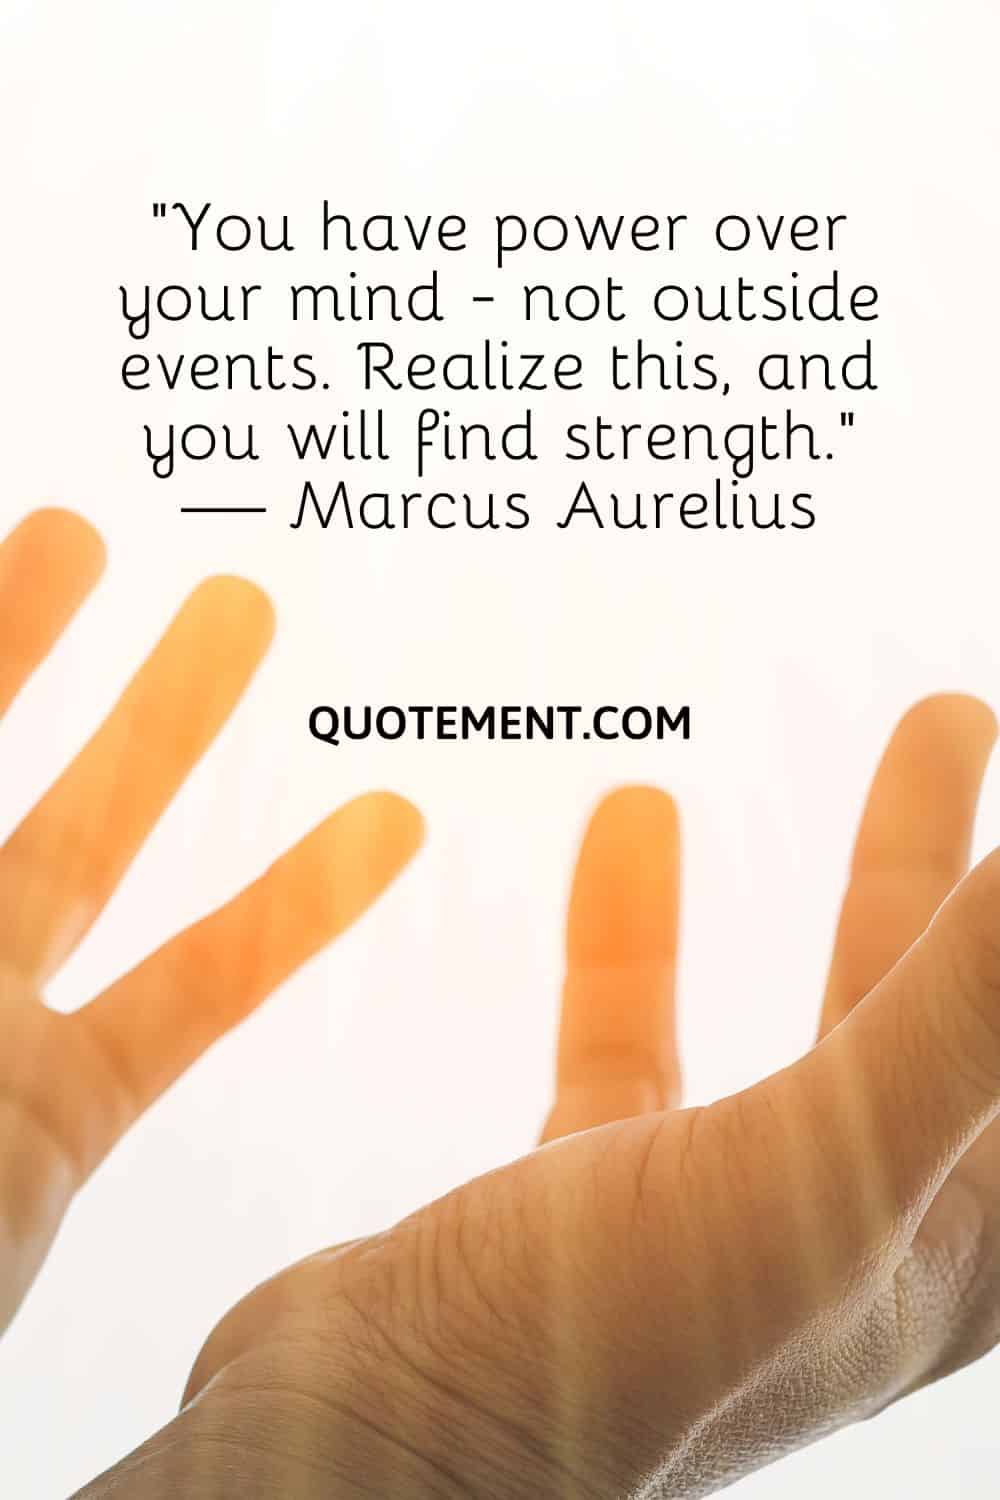 “You have power over your mind - not outside events. Realize this, and you will find strength.” — Marcus Aurelius